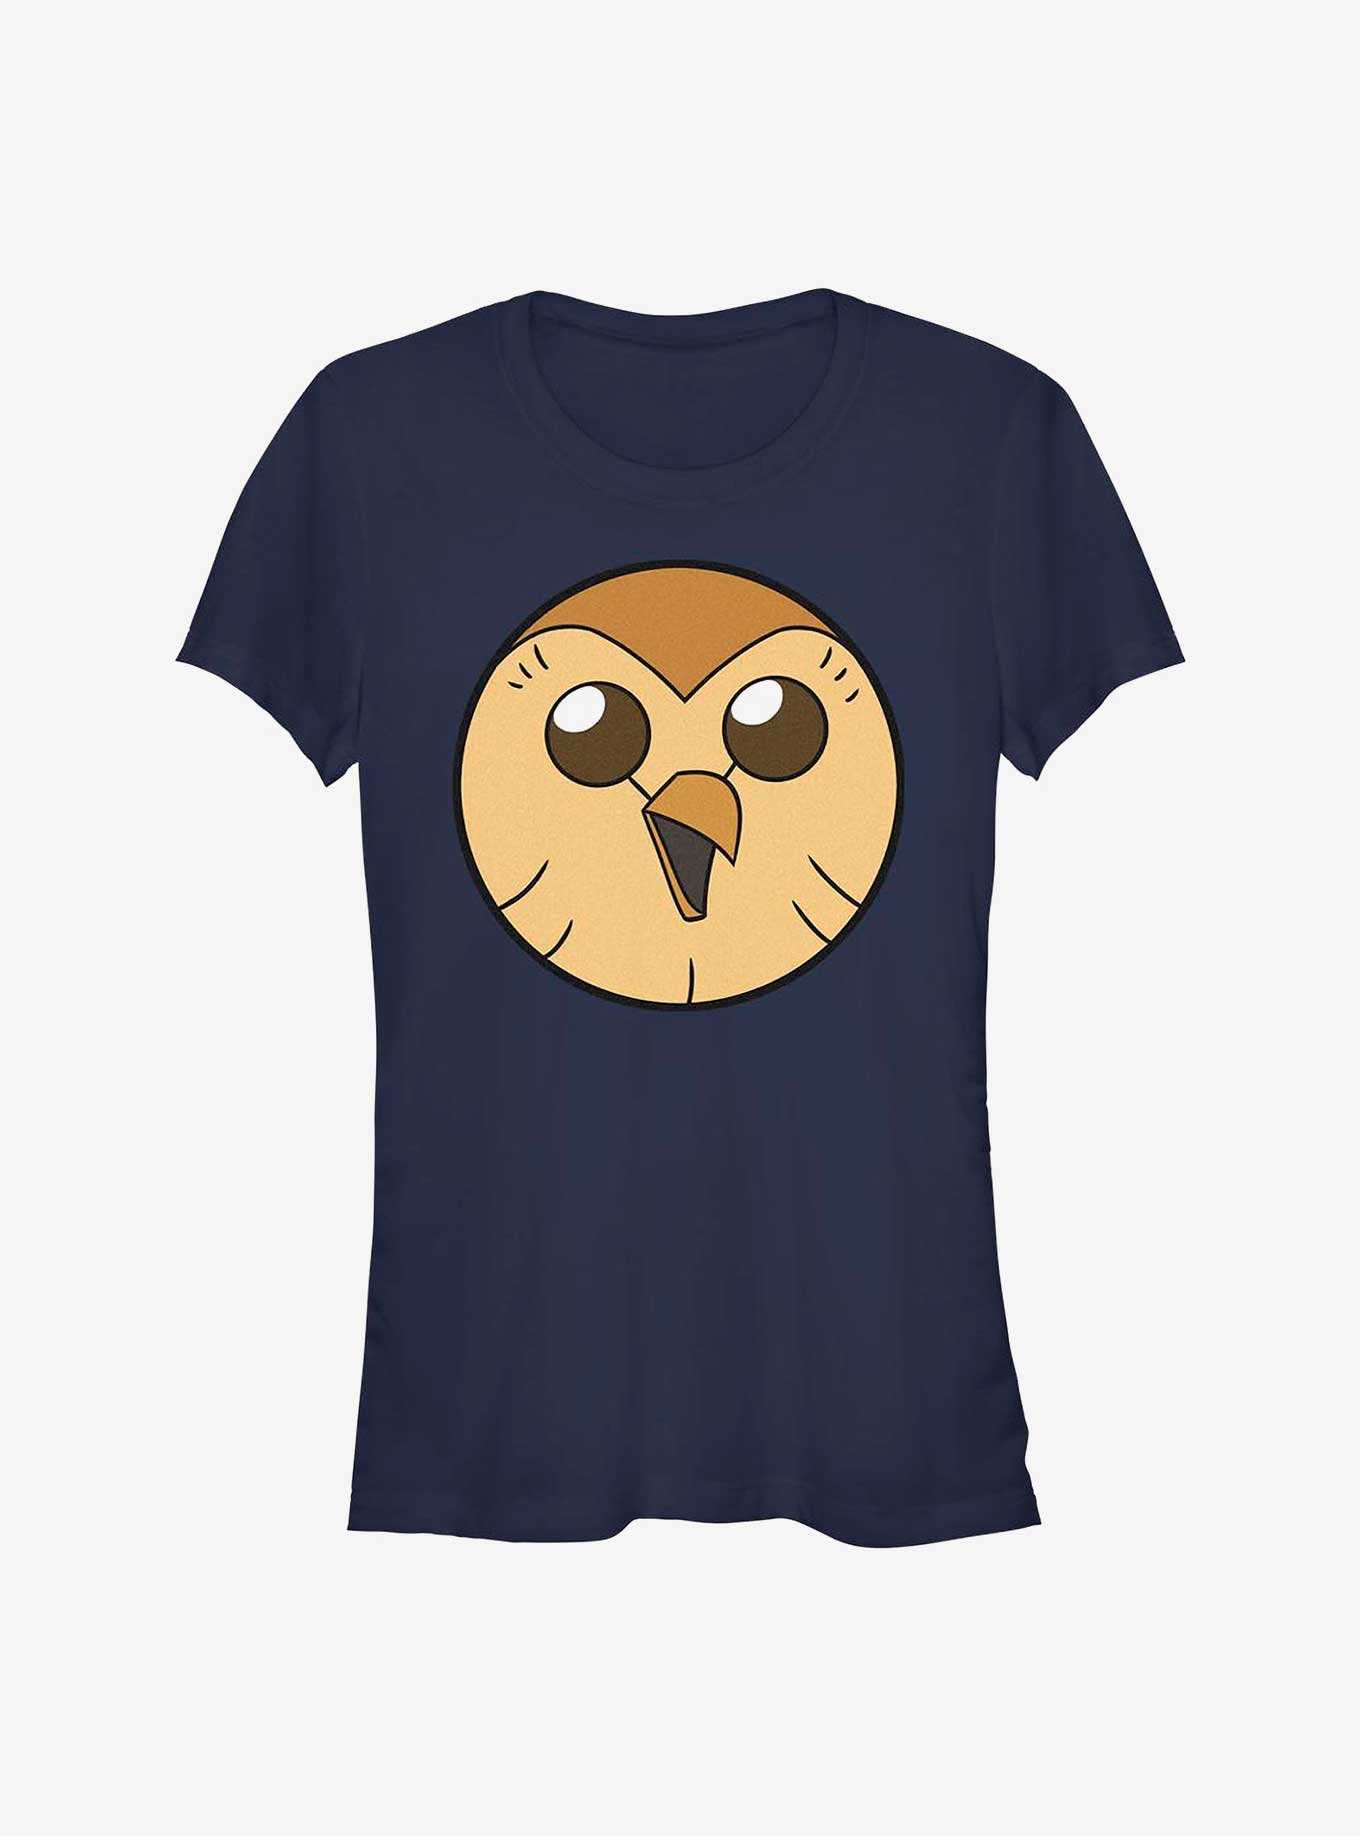 Disney's The Owl House Hooty Face Solid Girls T-Shirt, , hi-res